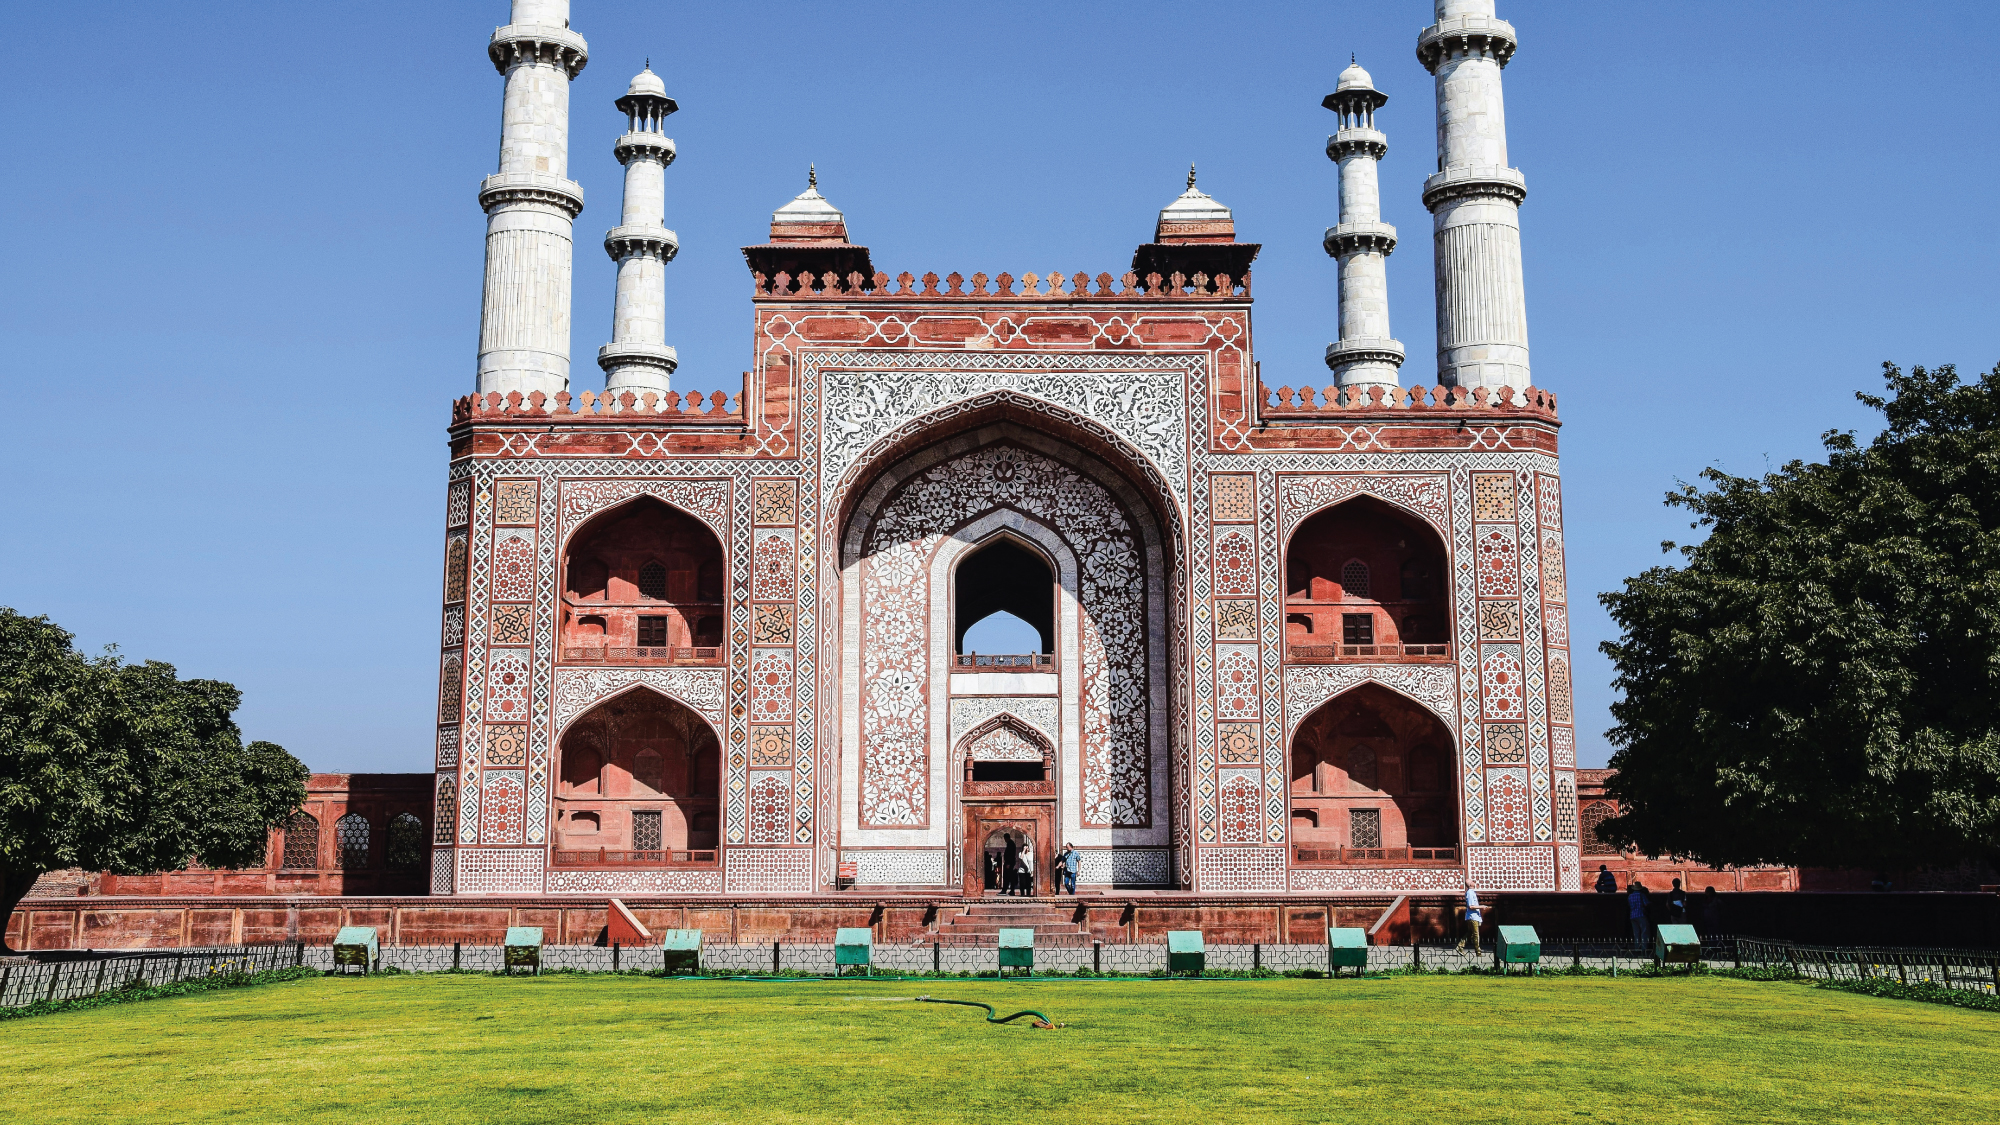 Historic forts and palaces with intricate designs.